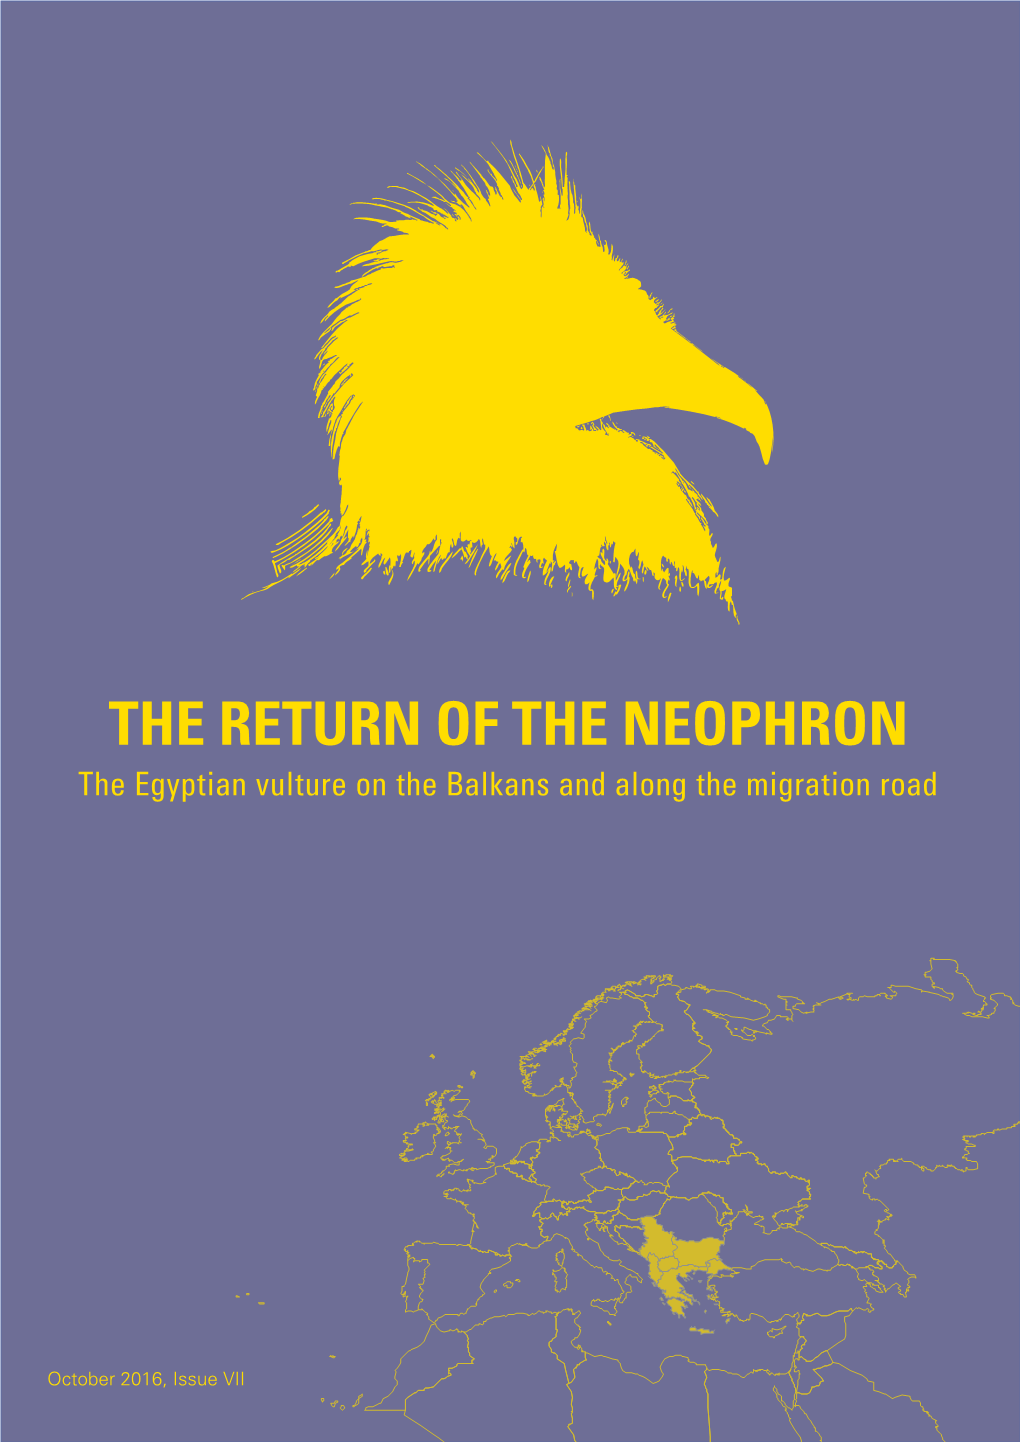 THE RETURN of the NEOPHRON the Egyptian Vulture on the Balkans and Along the Migration Road